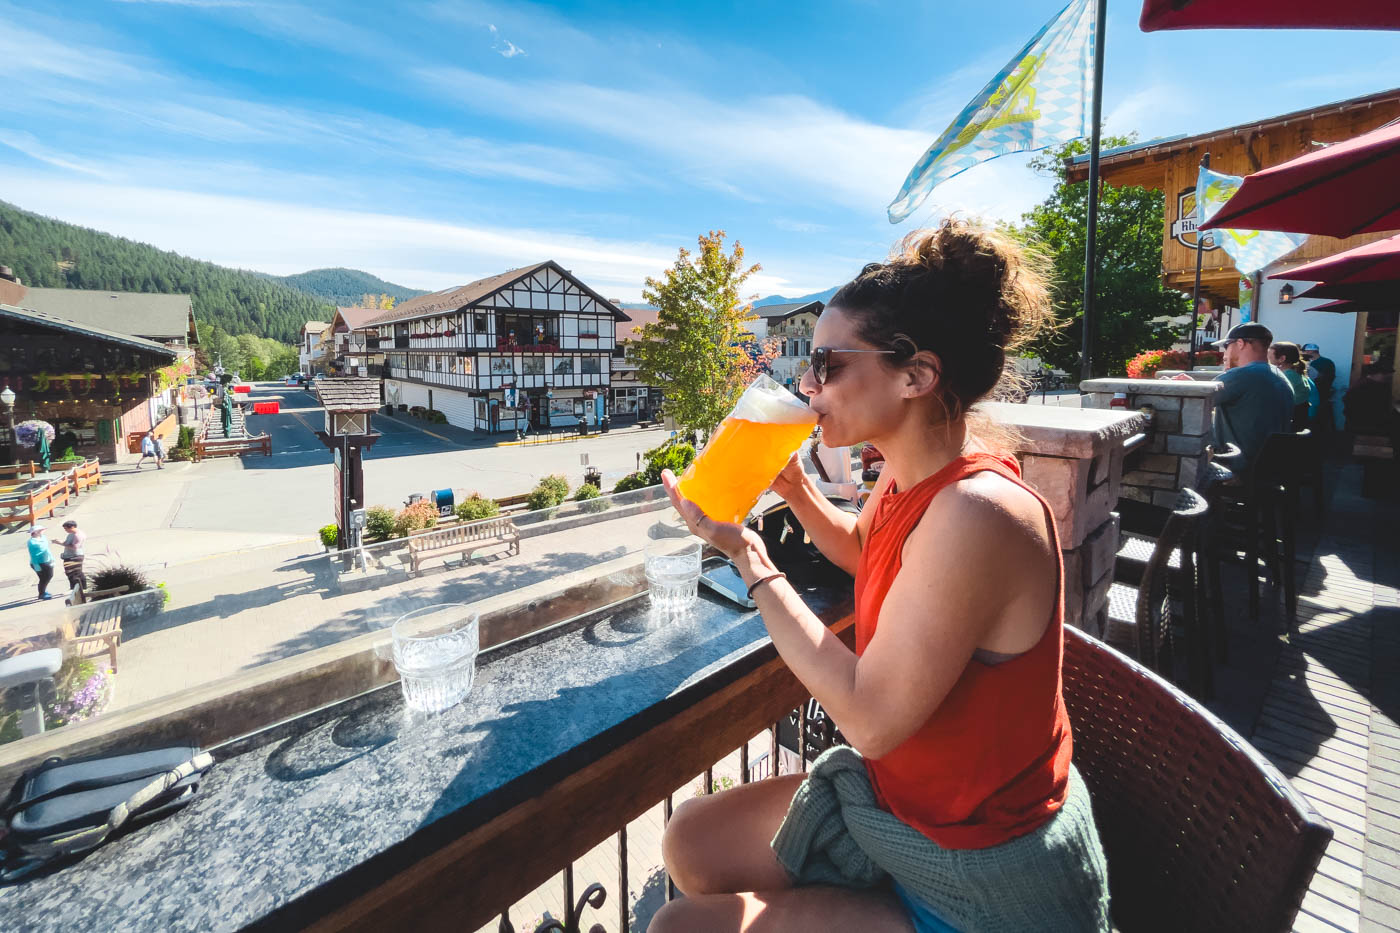 Nina sipping on a giant stein of beer while overlooking the center of Leavenworth from a balcony.